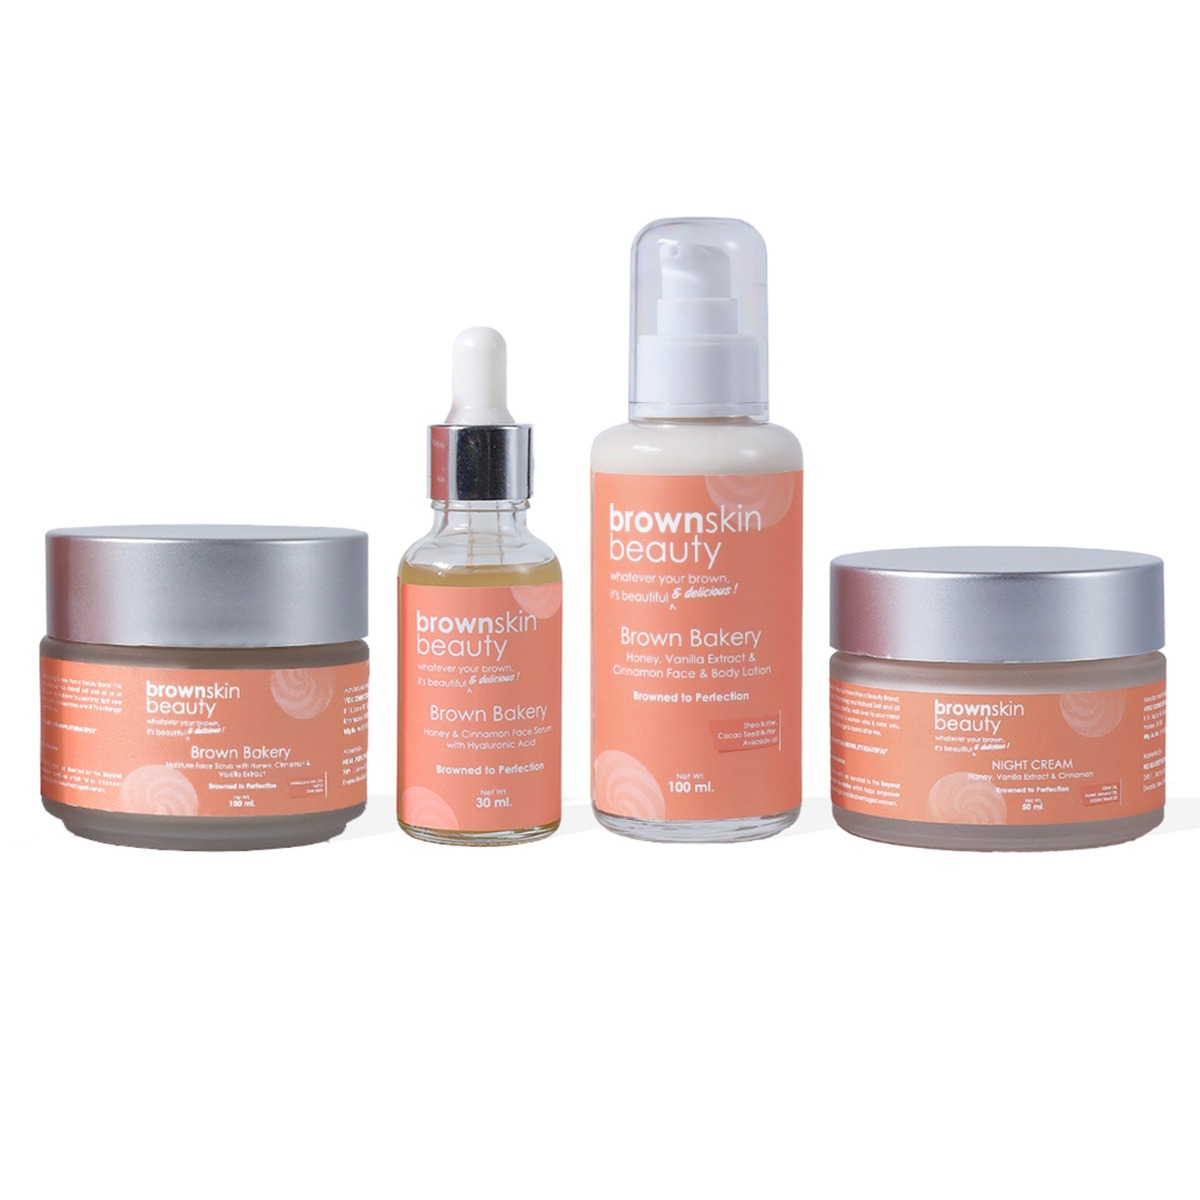 BrownSkin Beauty Brown Bakery Skincare Set With Free Travel Pouch